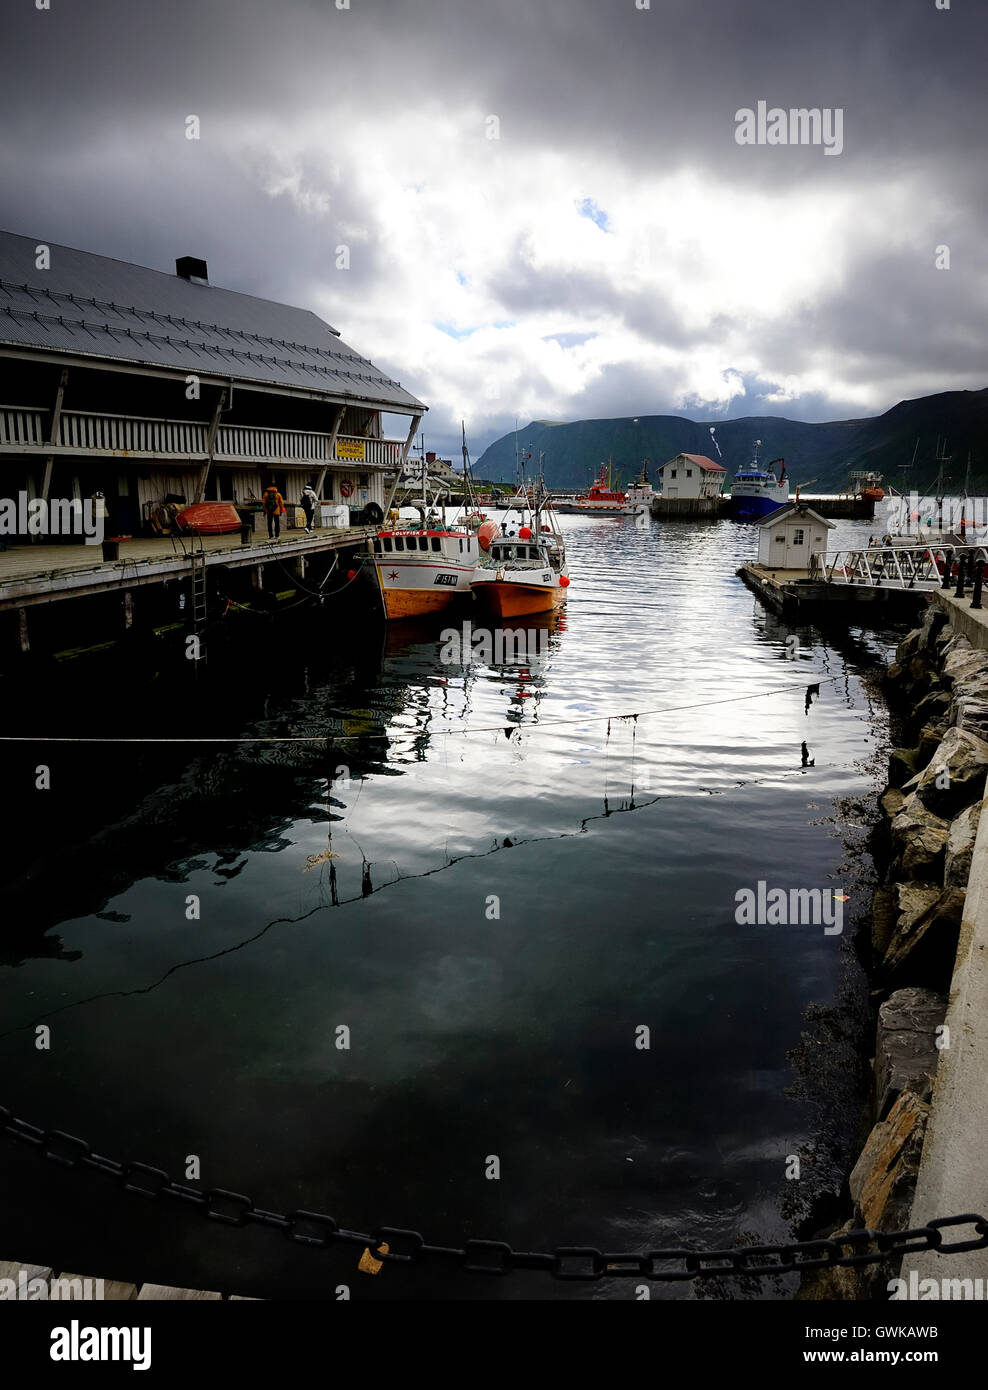 Fishing boats in a Norwegian Harbour Stock Photo